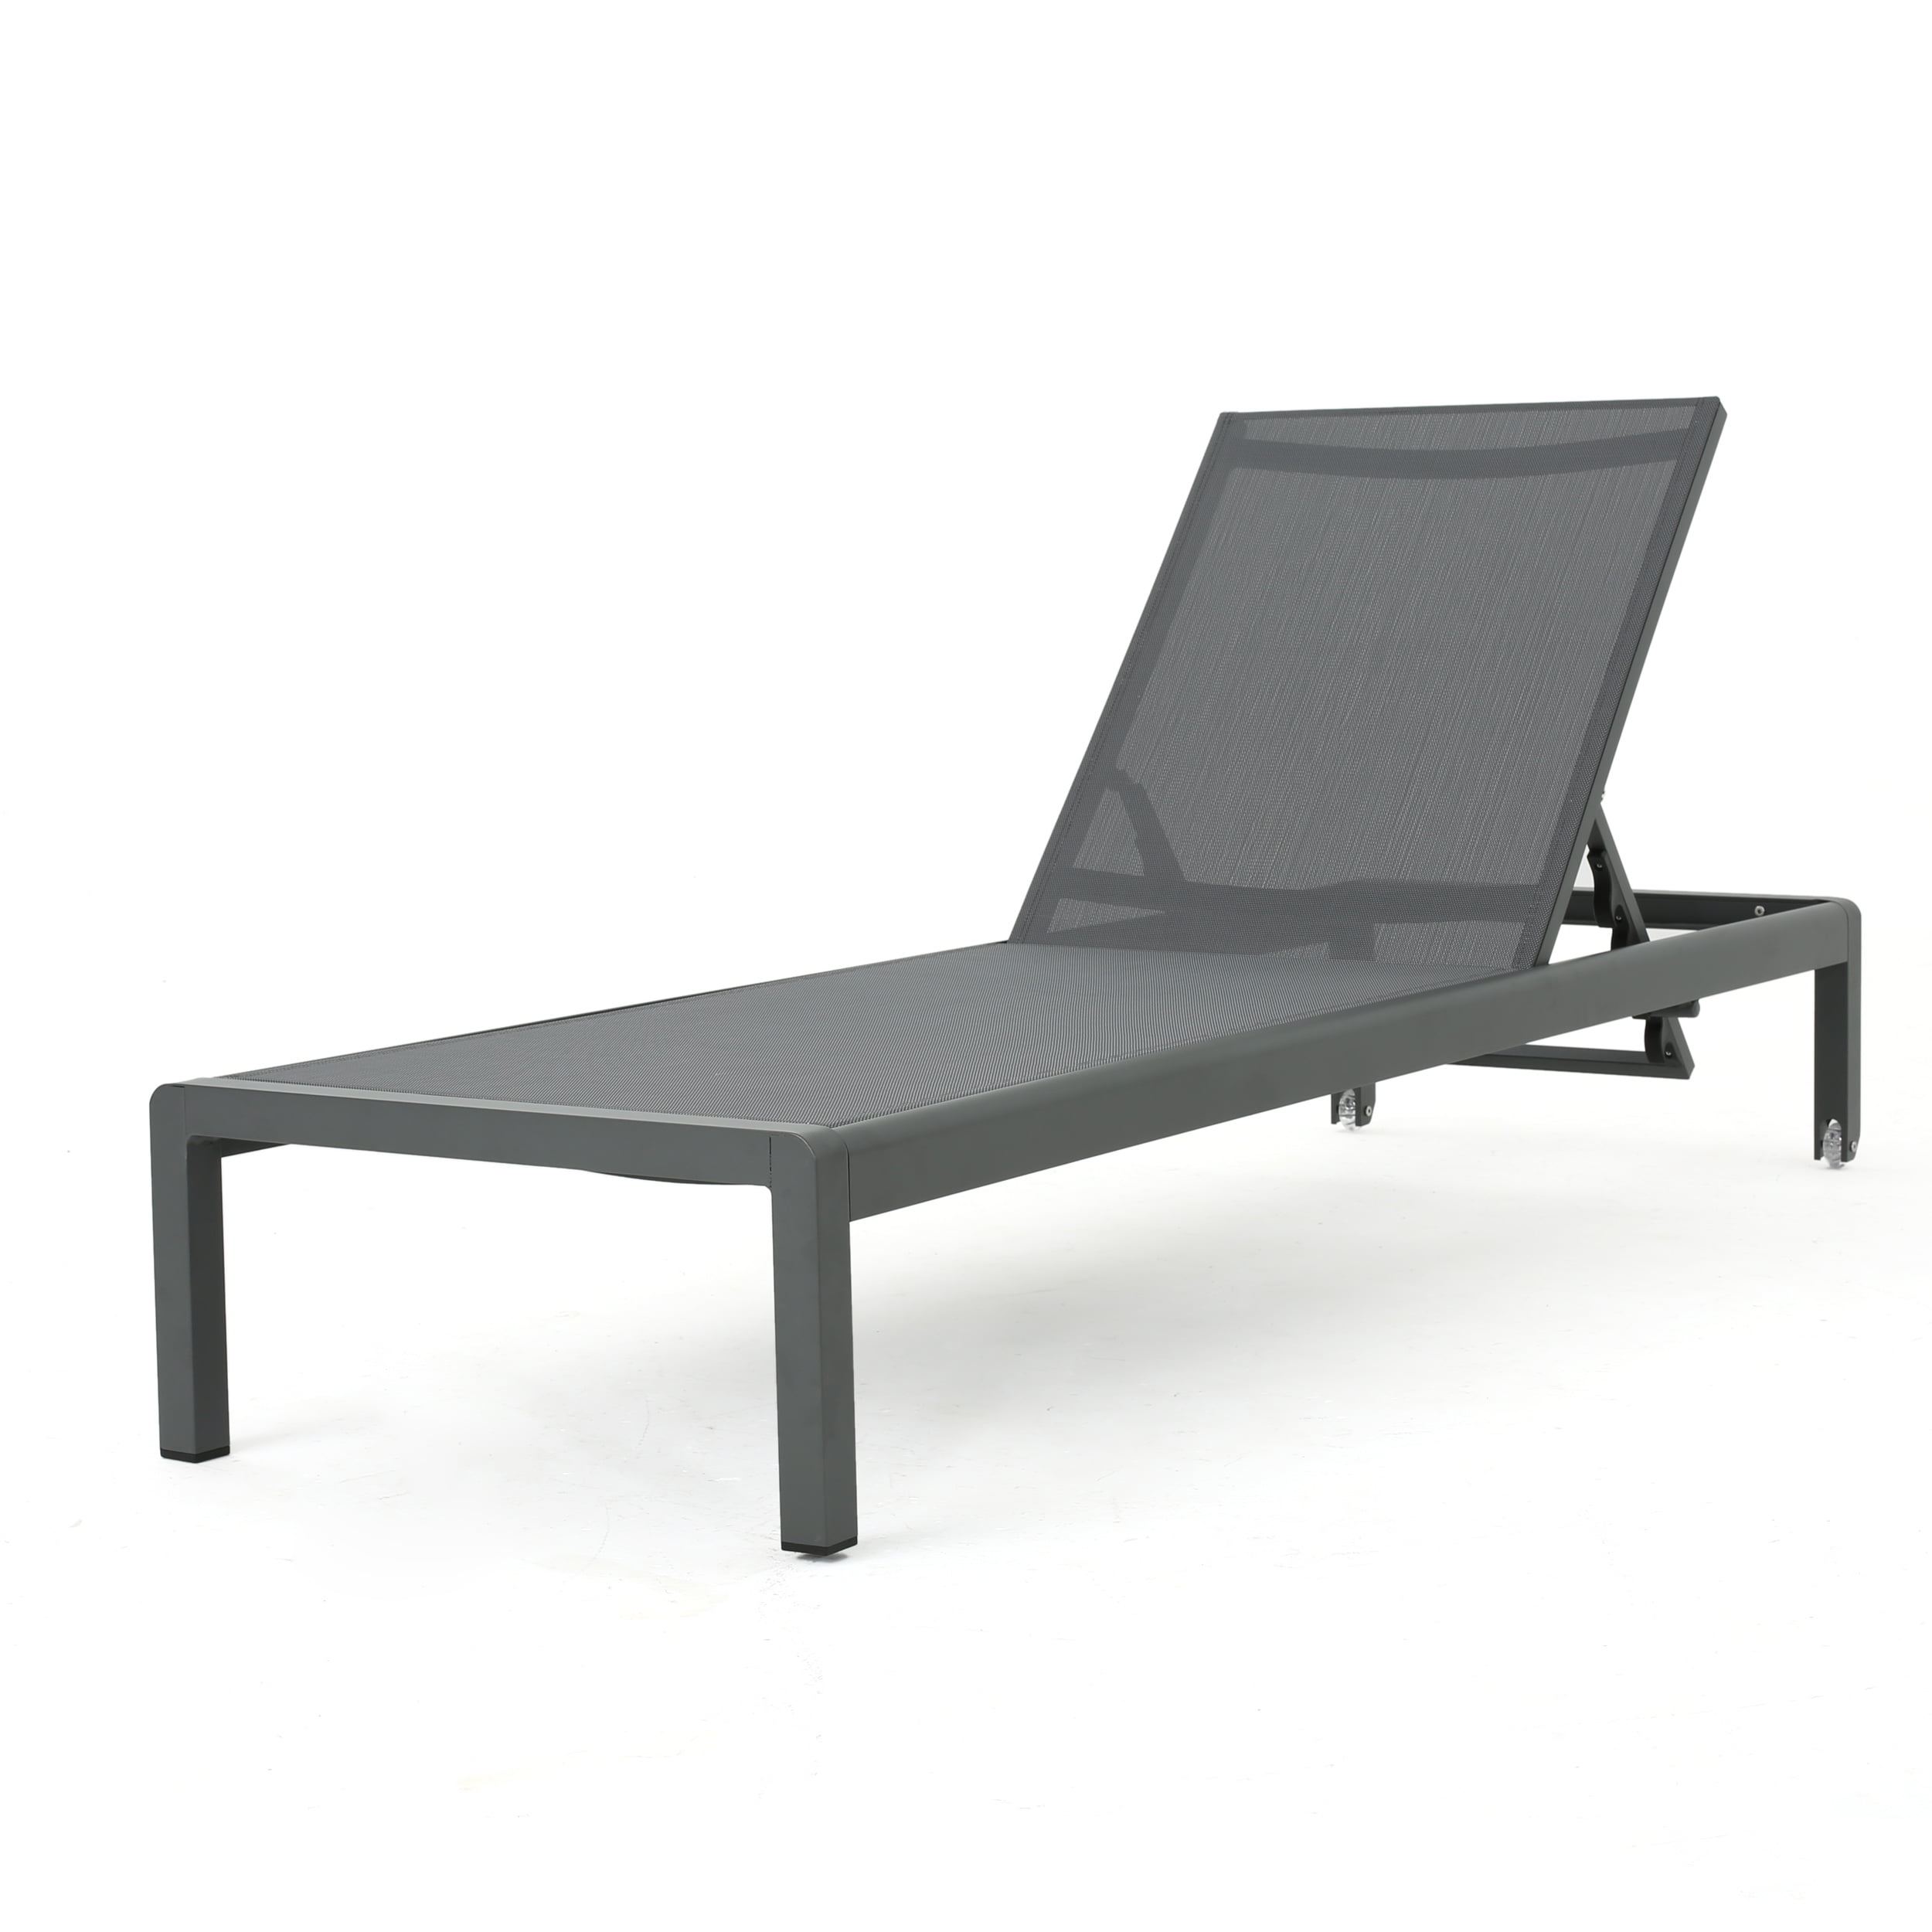 Christopher Knight Home 304259 Fern Outdoor Mesh Chaise Lounge Rust-Proof Aluminum Frame Grey/Silver 